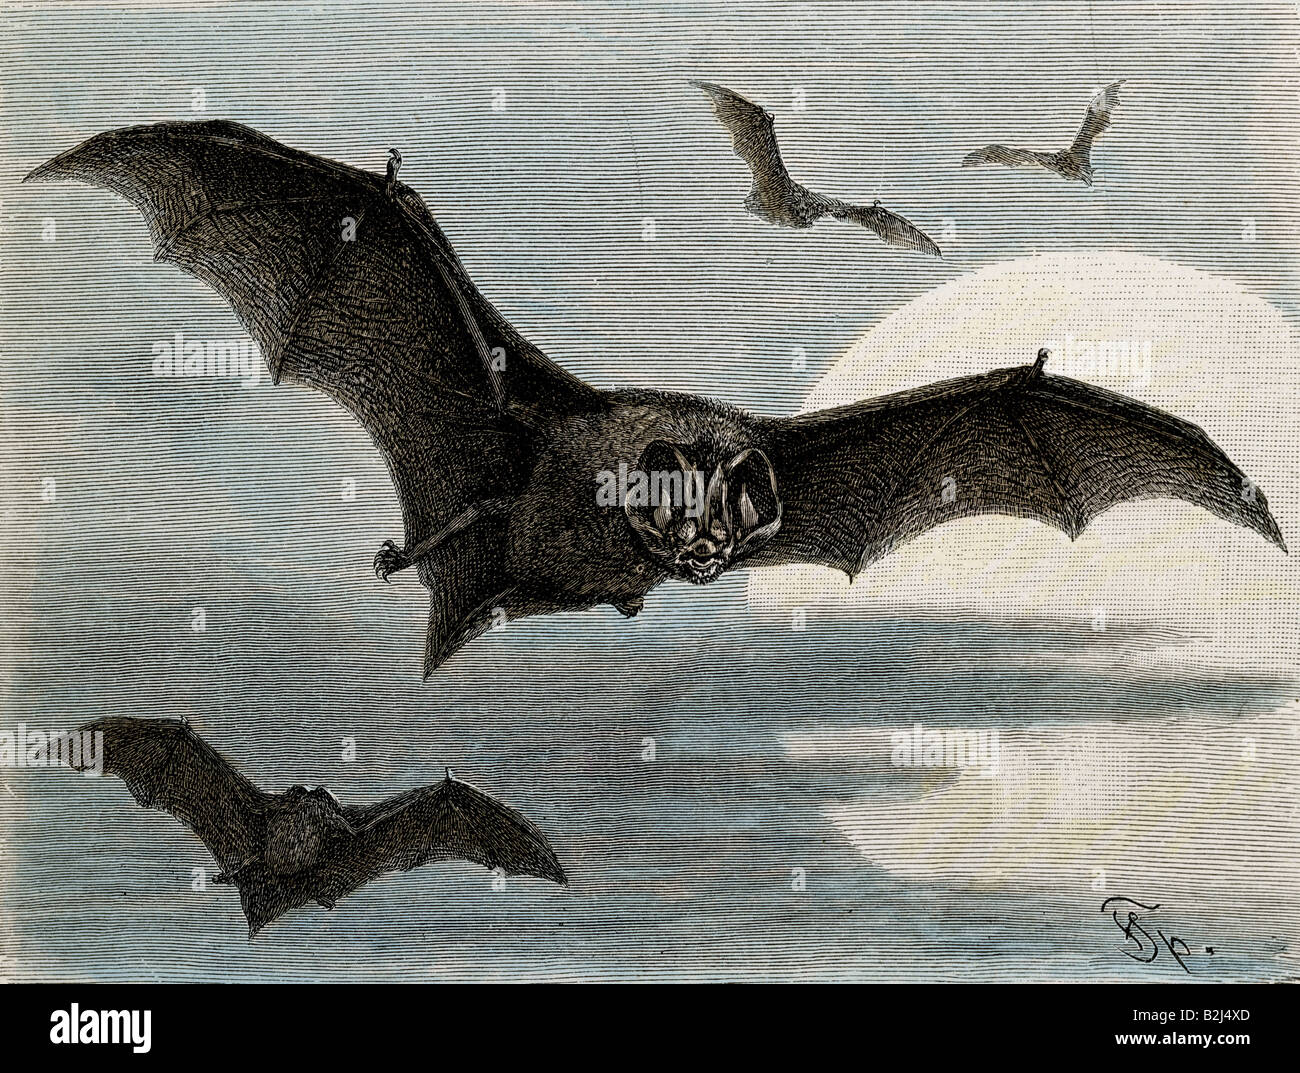 zoology / animals, mammal / mammalian, bats (Chiroptera), Barbastella, Barbastelle (Barbastella barbastellus), wood engraving, coloured, from "Die Saeugetiere", by Alfred Brehm, Leipzig, Germany, 1893, private collection, Stock Photo